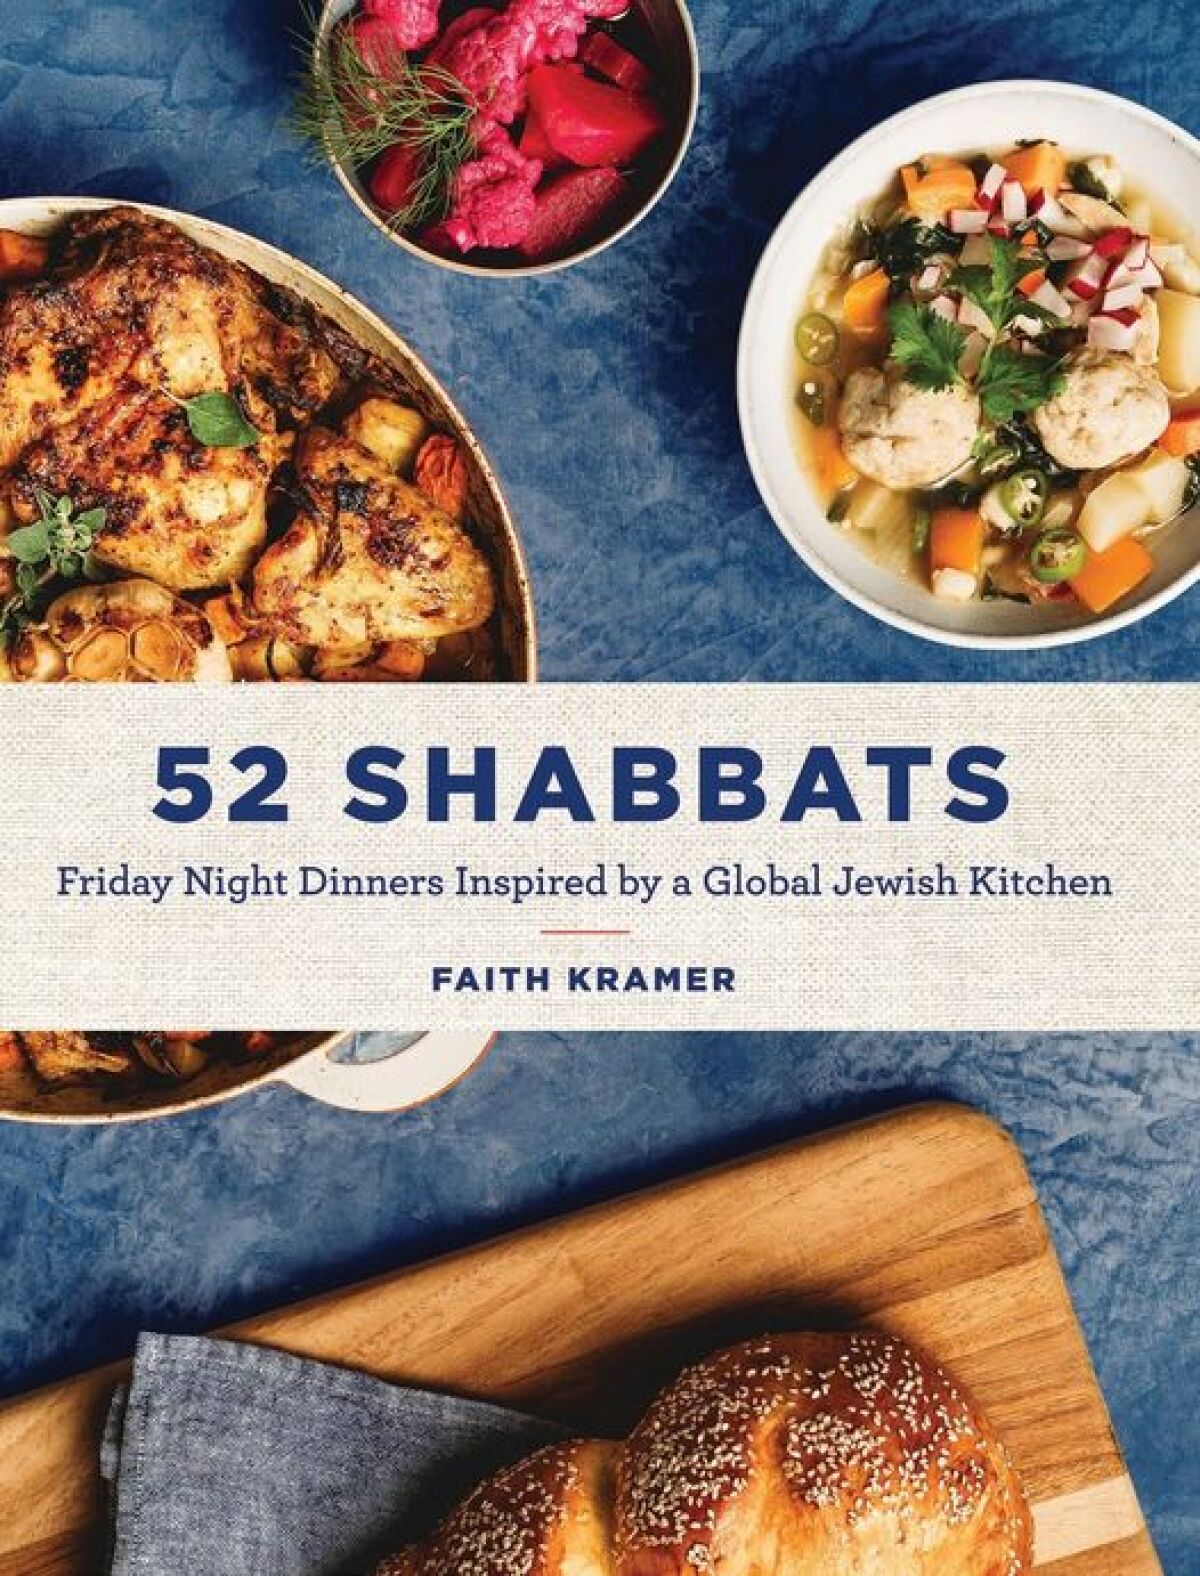 Cover of "52 Shabbats: Friday Night Dinners Inspired by a Global Jewish Kitchen” by Faith Kramer